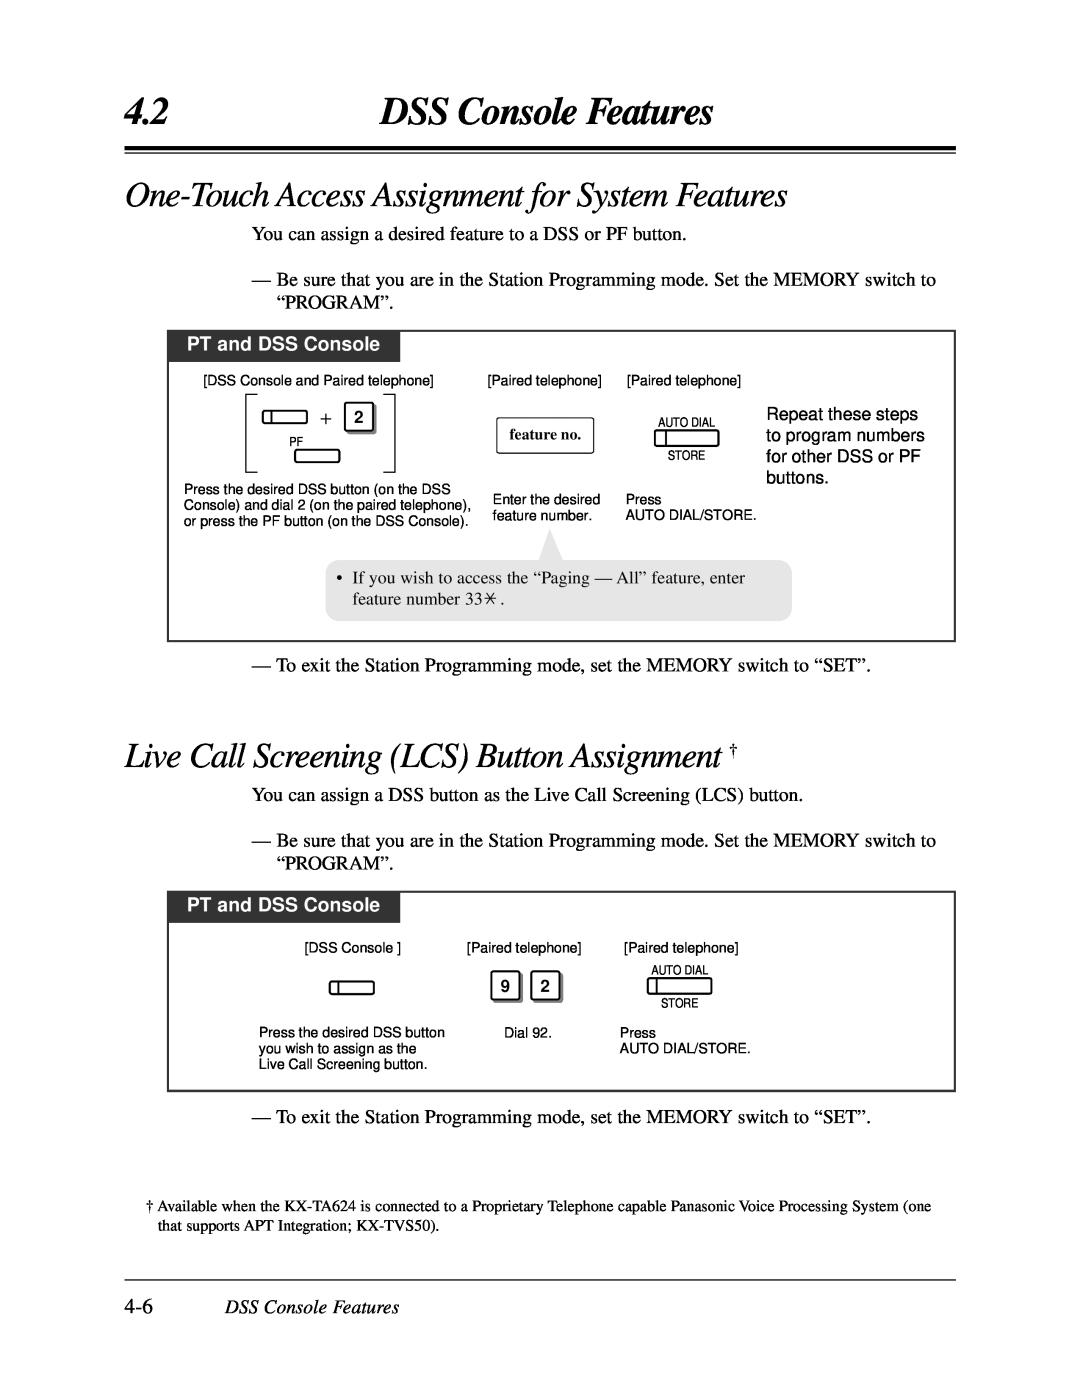 Panasonic KX-TA624 user manual One-TouchAccess Assignment for System Features, Live Call Screening LCS Button Assignment † 